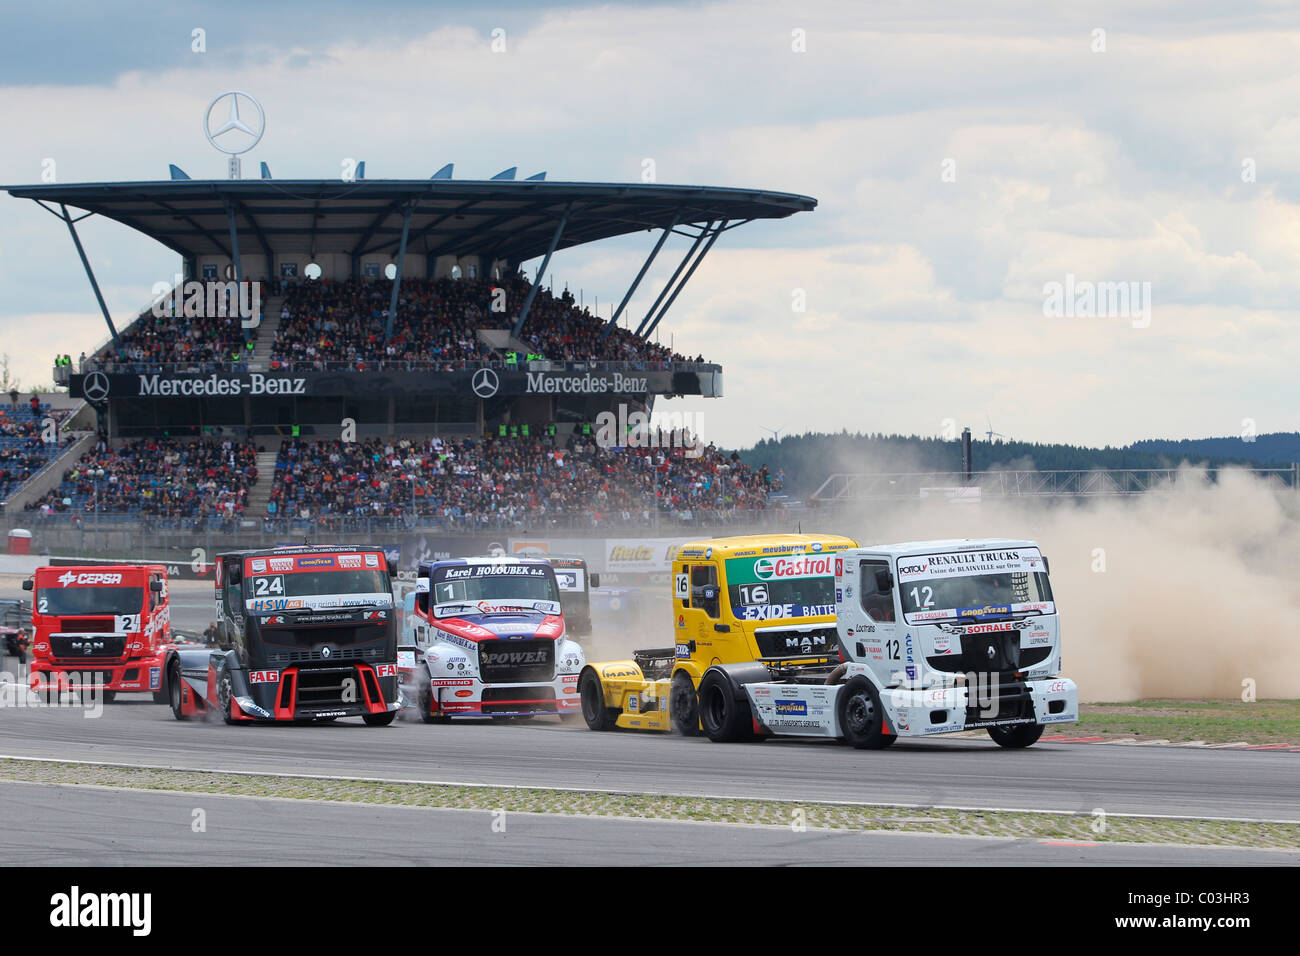 ADAC Truck Grand Prix Nuerburgring 2010, start of the European Truck Racing Championships, Anthony Janiec, front, Alex Lvov Stock Photo